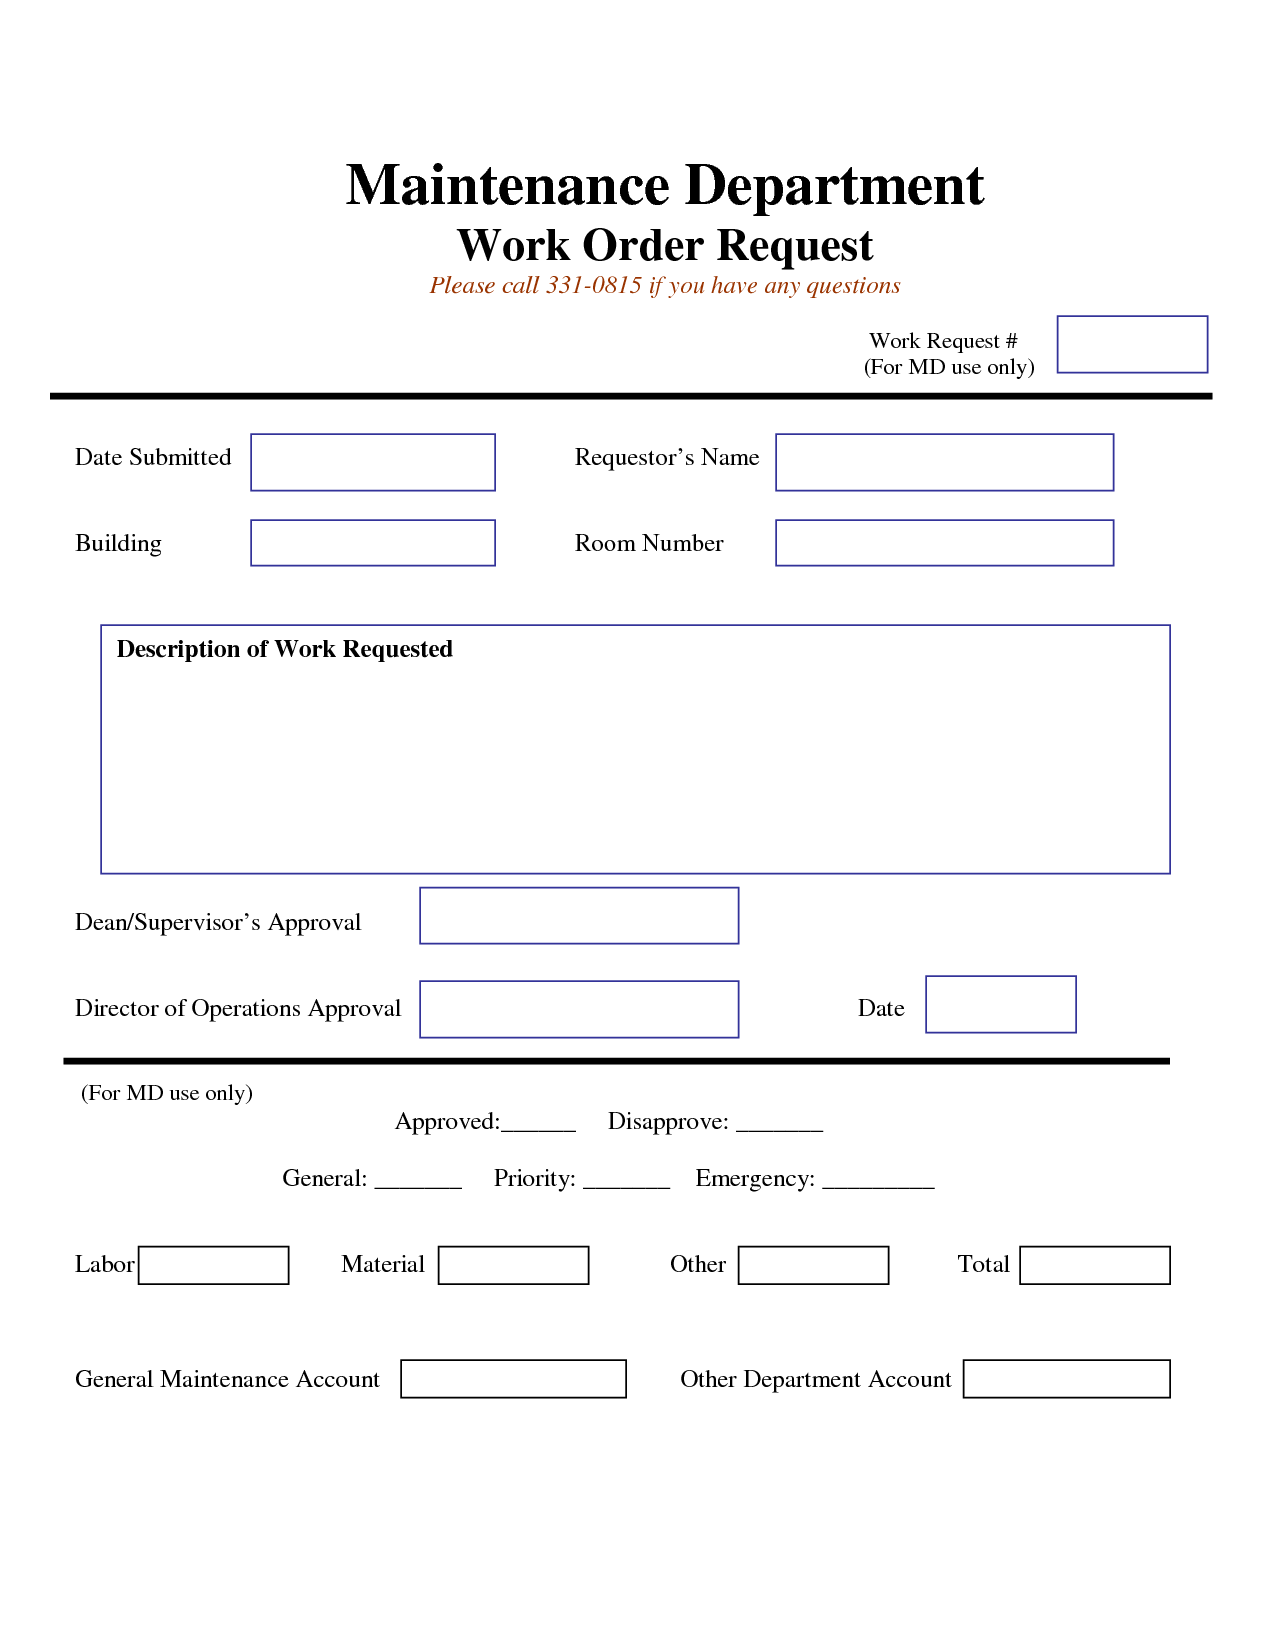 printable-maintenance-work-order-forms-charlotte-clergy-coalition